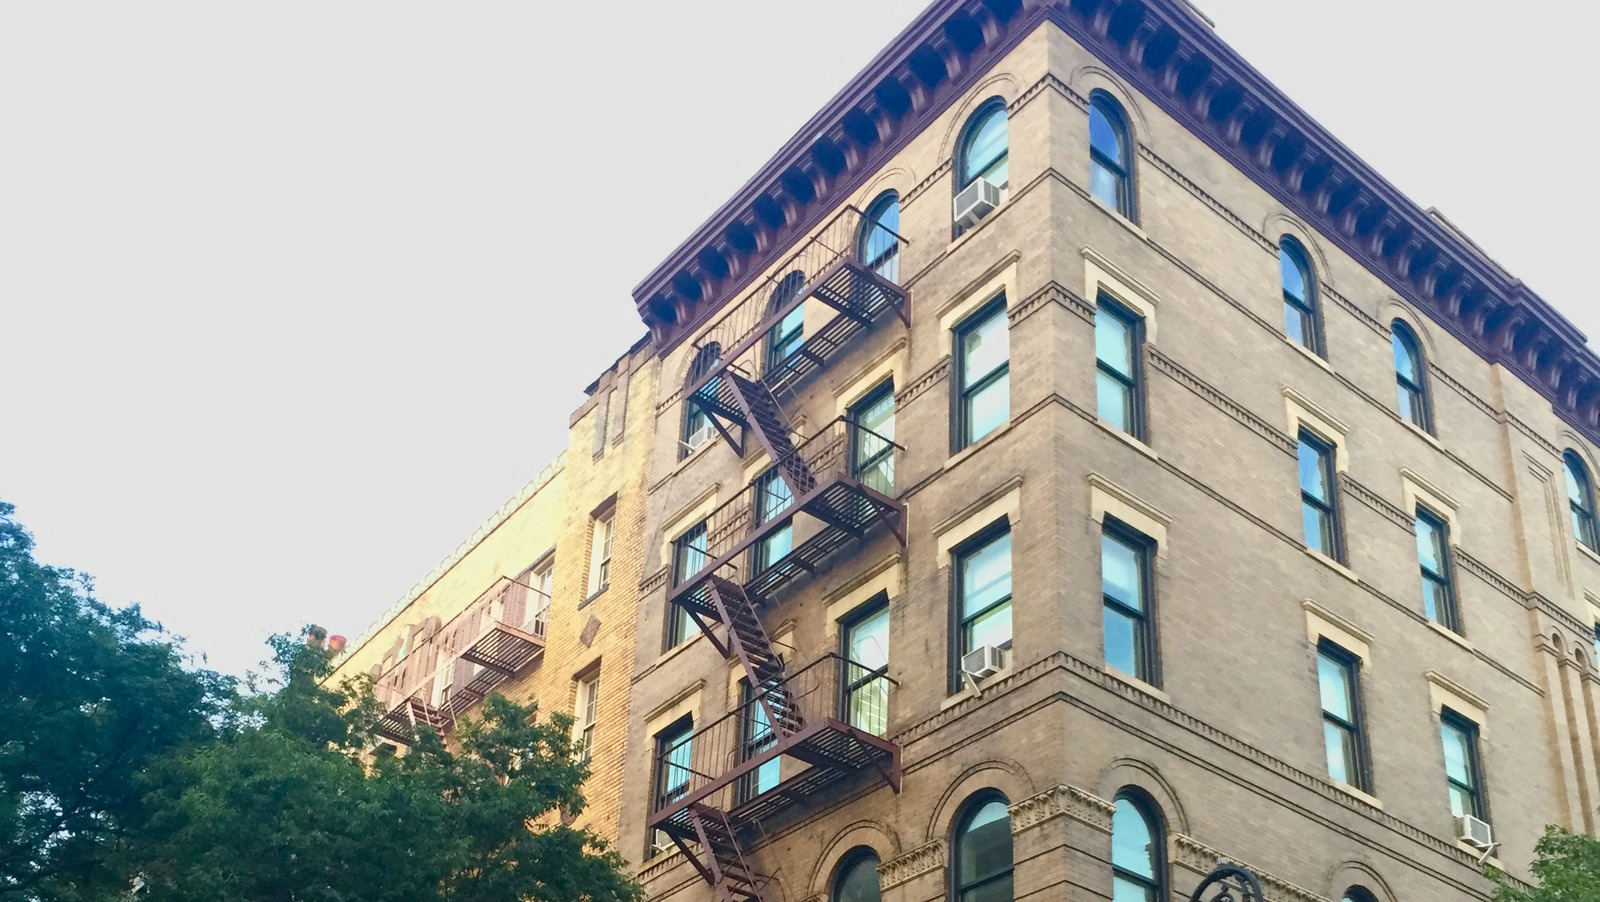 Here's Where You Can Visit The Exterior Of Monica's Apartment In Friends